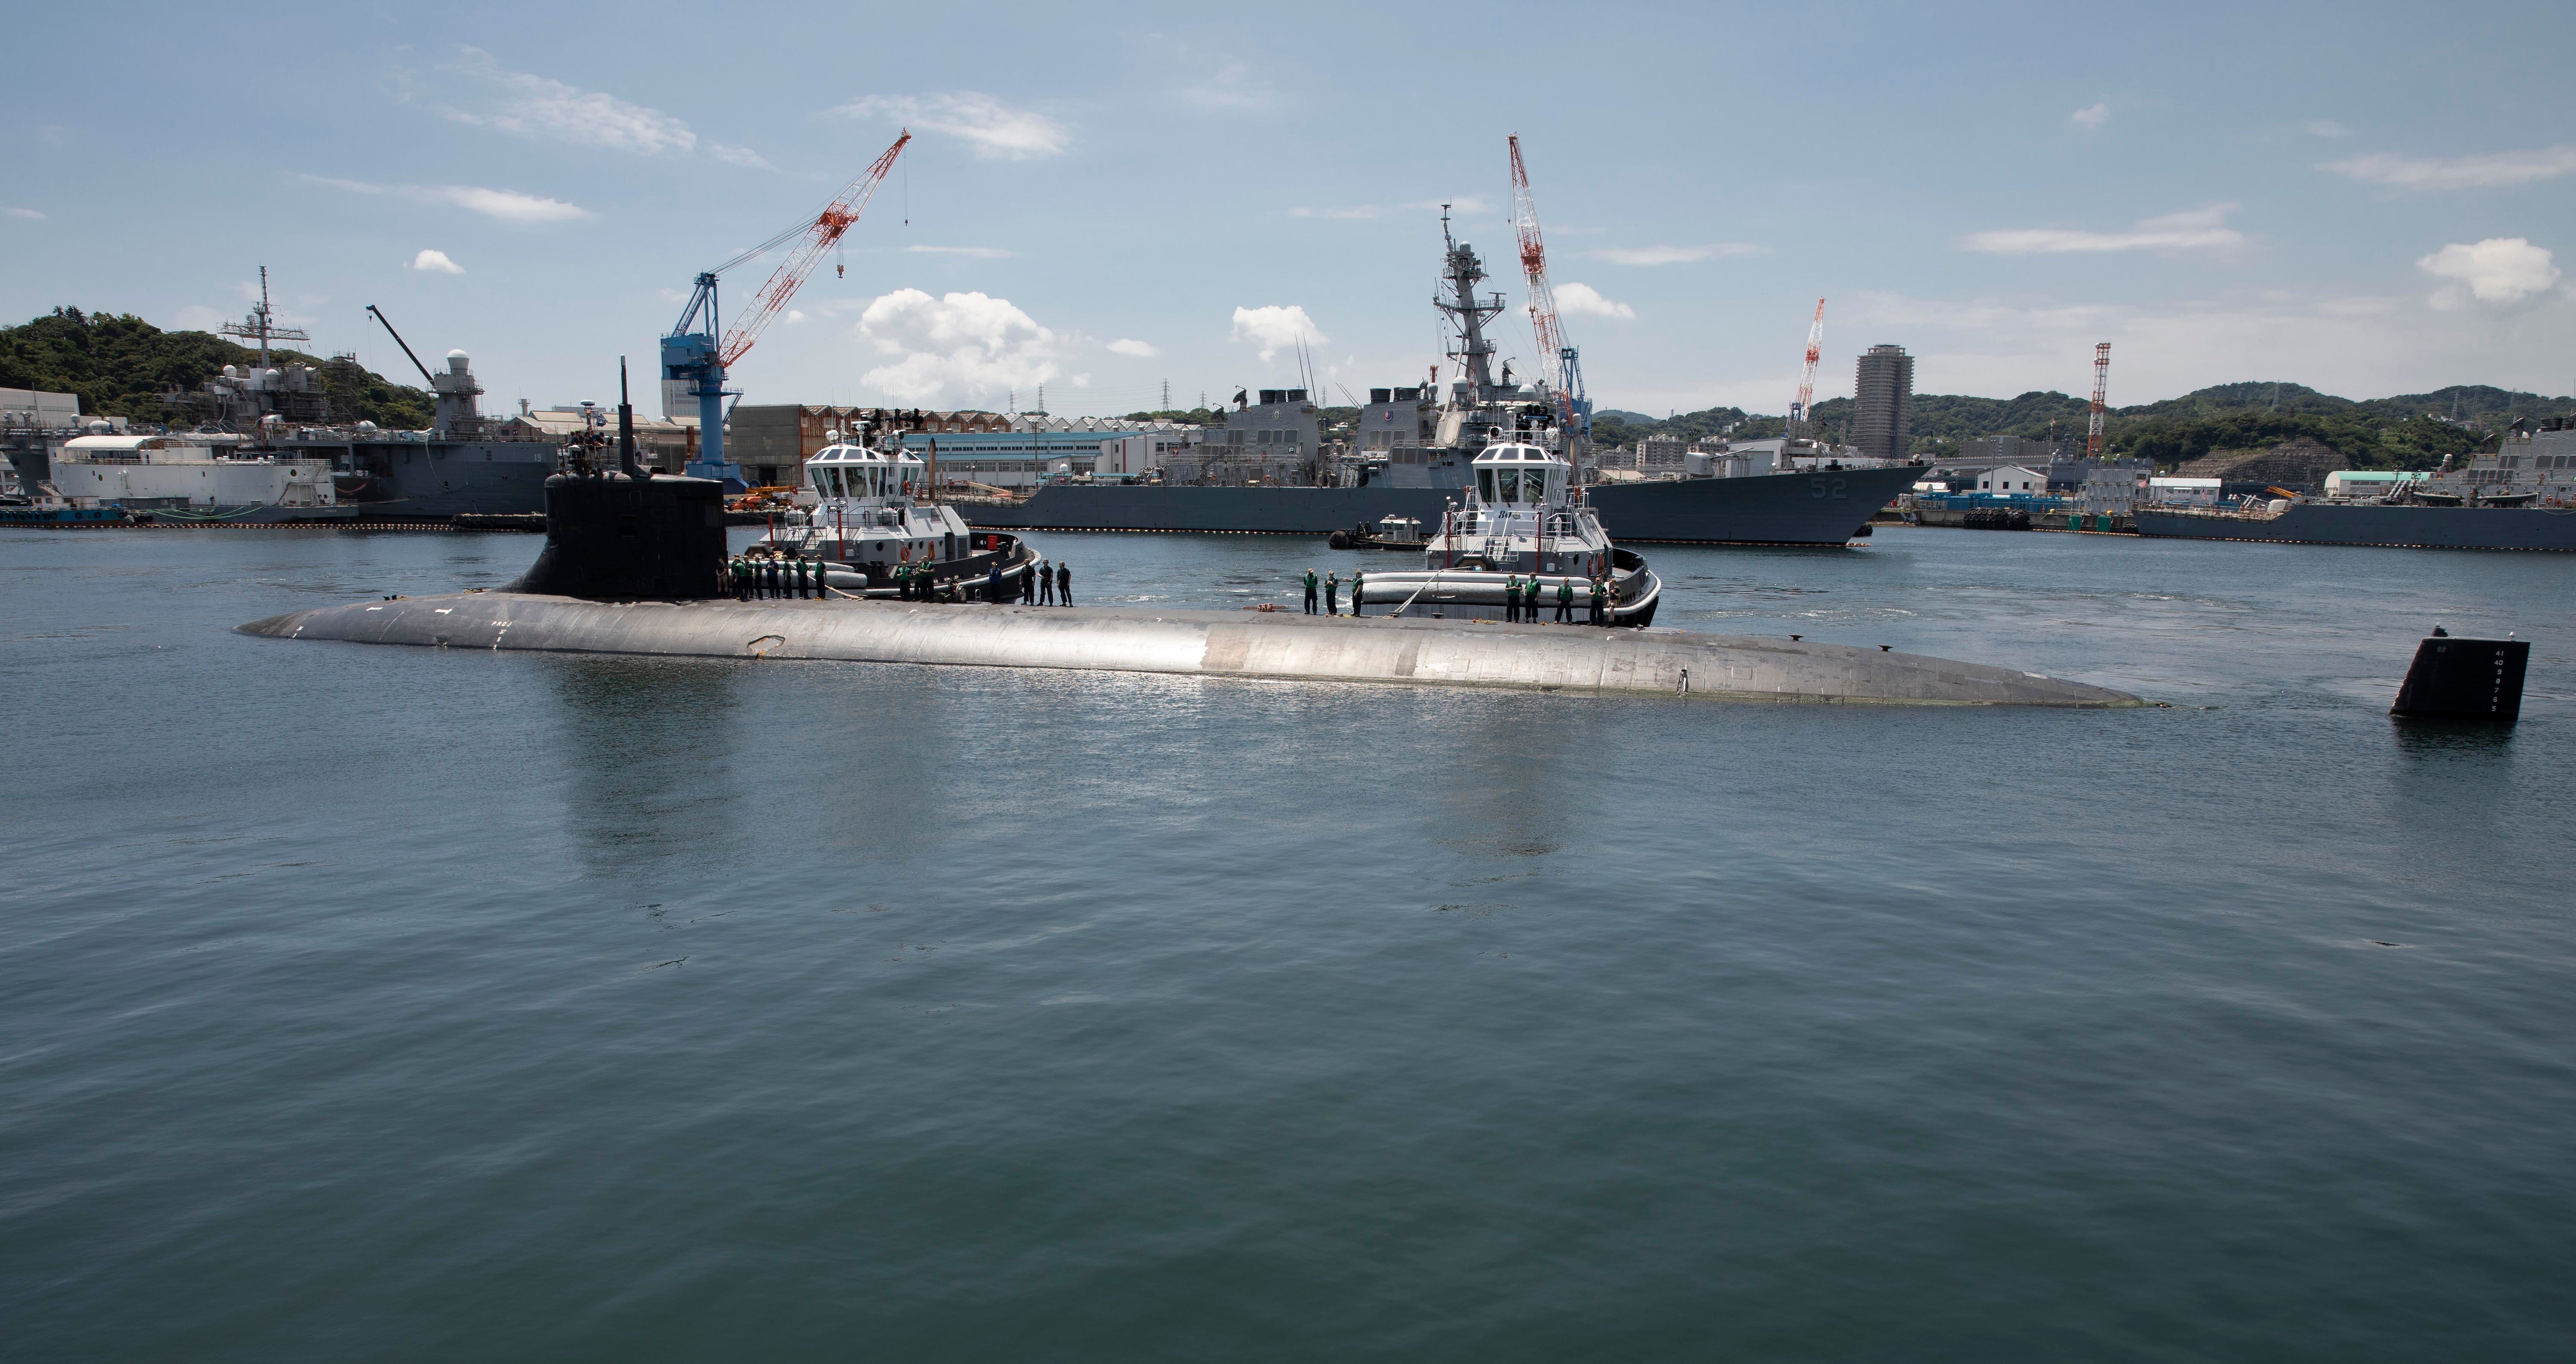 File photo: The seawolf-class fast-attack submarine USS Connecticut arrives at a US Navy base in Yokosuka, Japan, on 31 July